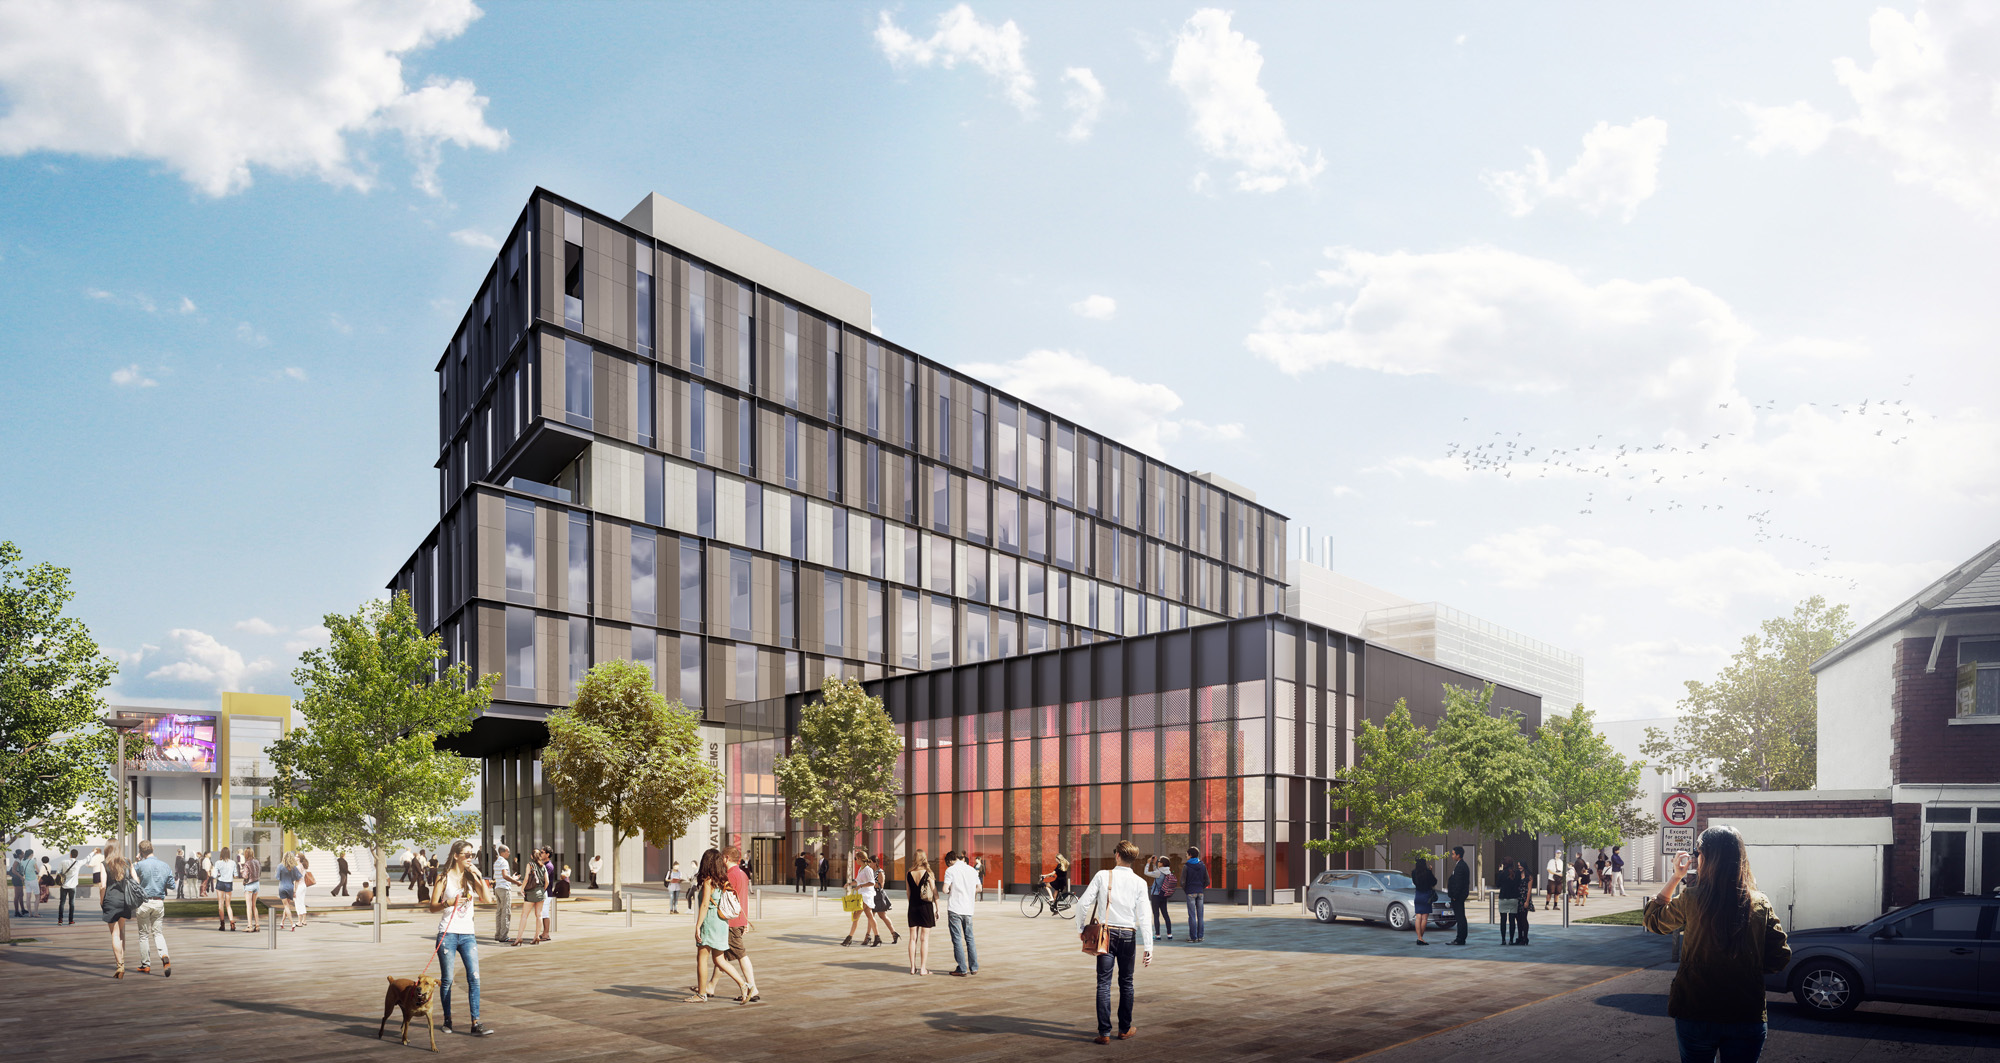 Cardiff University signs Innovation Campus deal